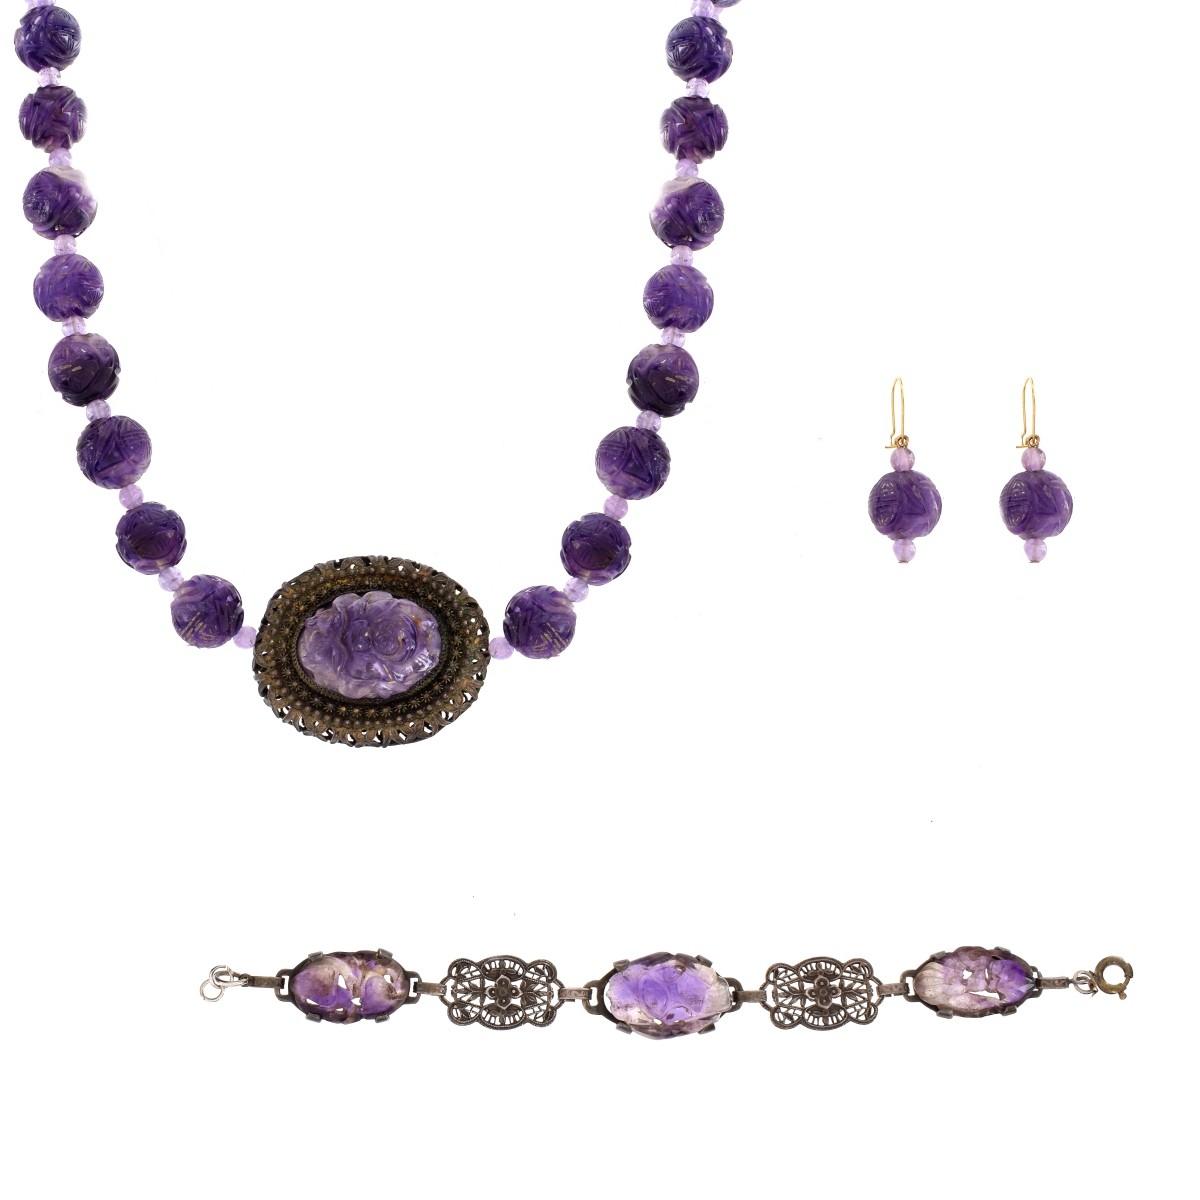 Antique Amethyst and Sterling Jewelry Suite